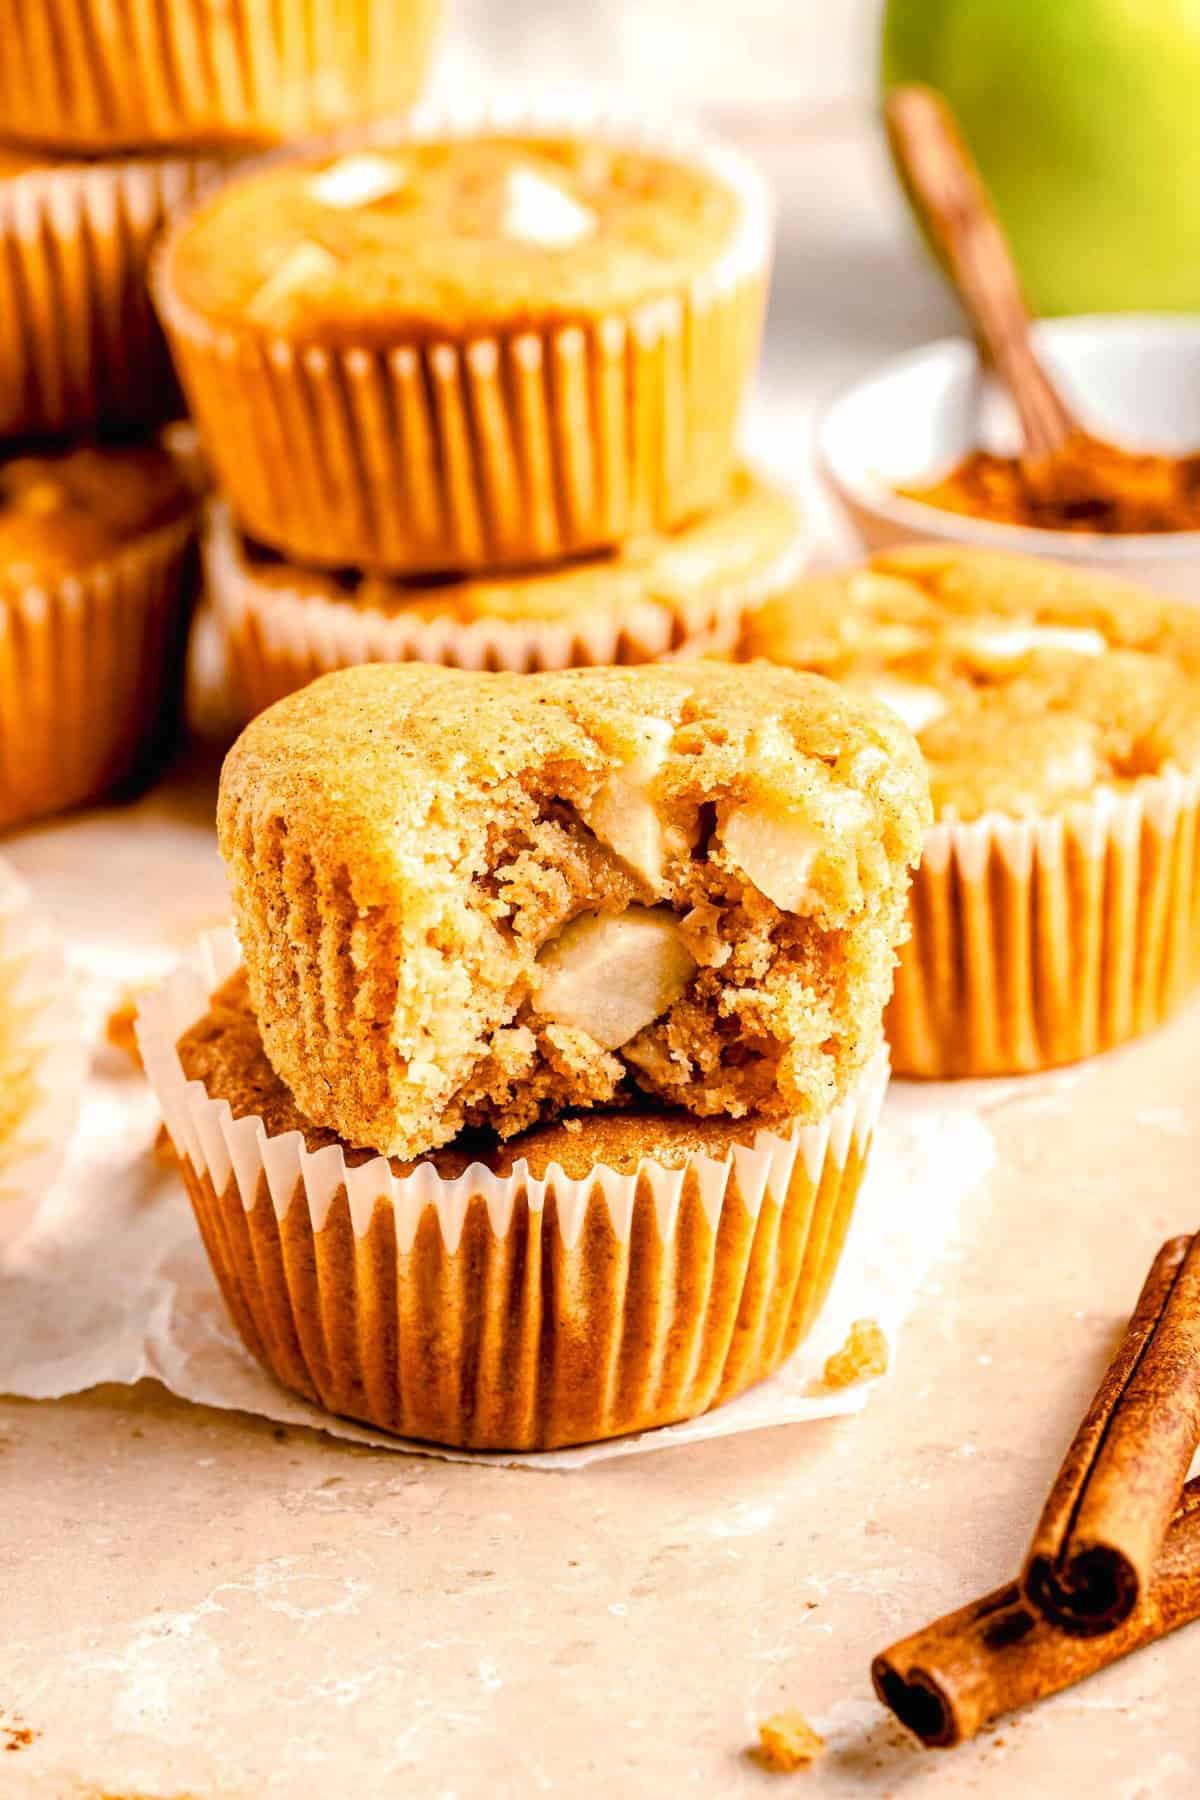 Apple cinnamon muffins stacked on top of each other. One of them has a bite taken out of it.